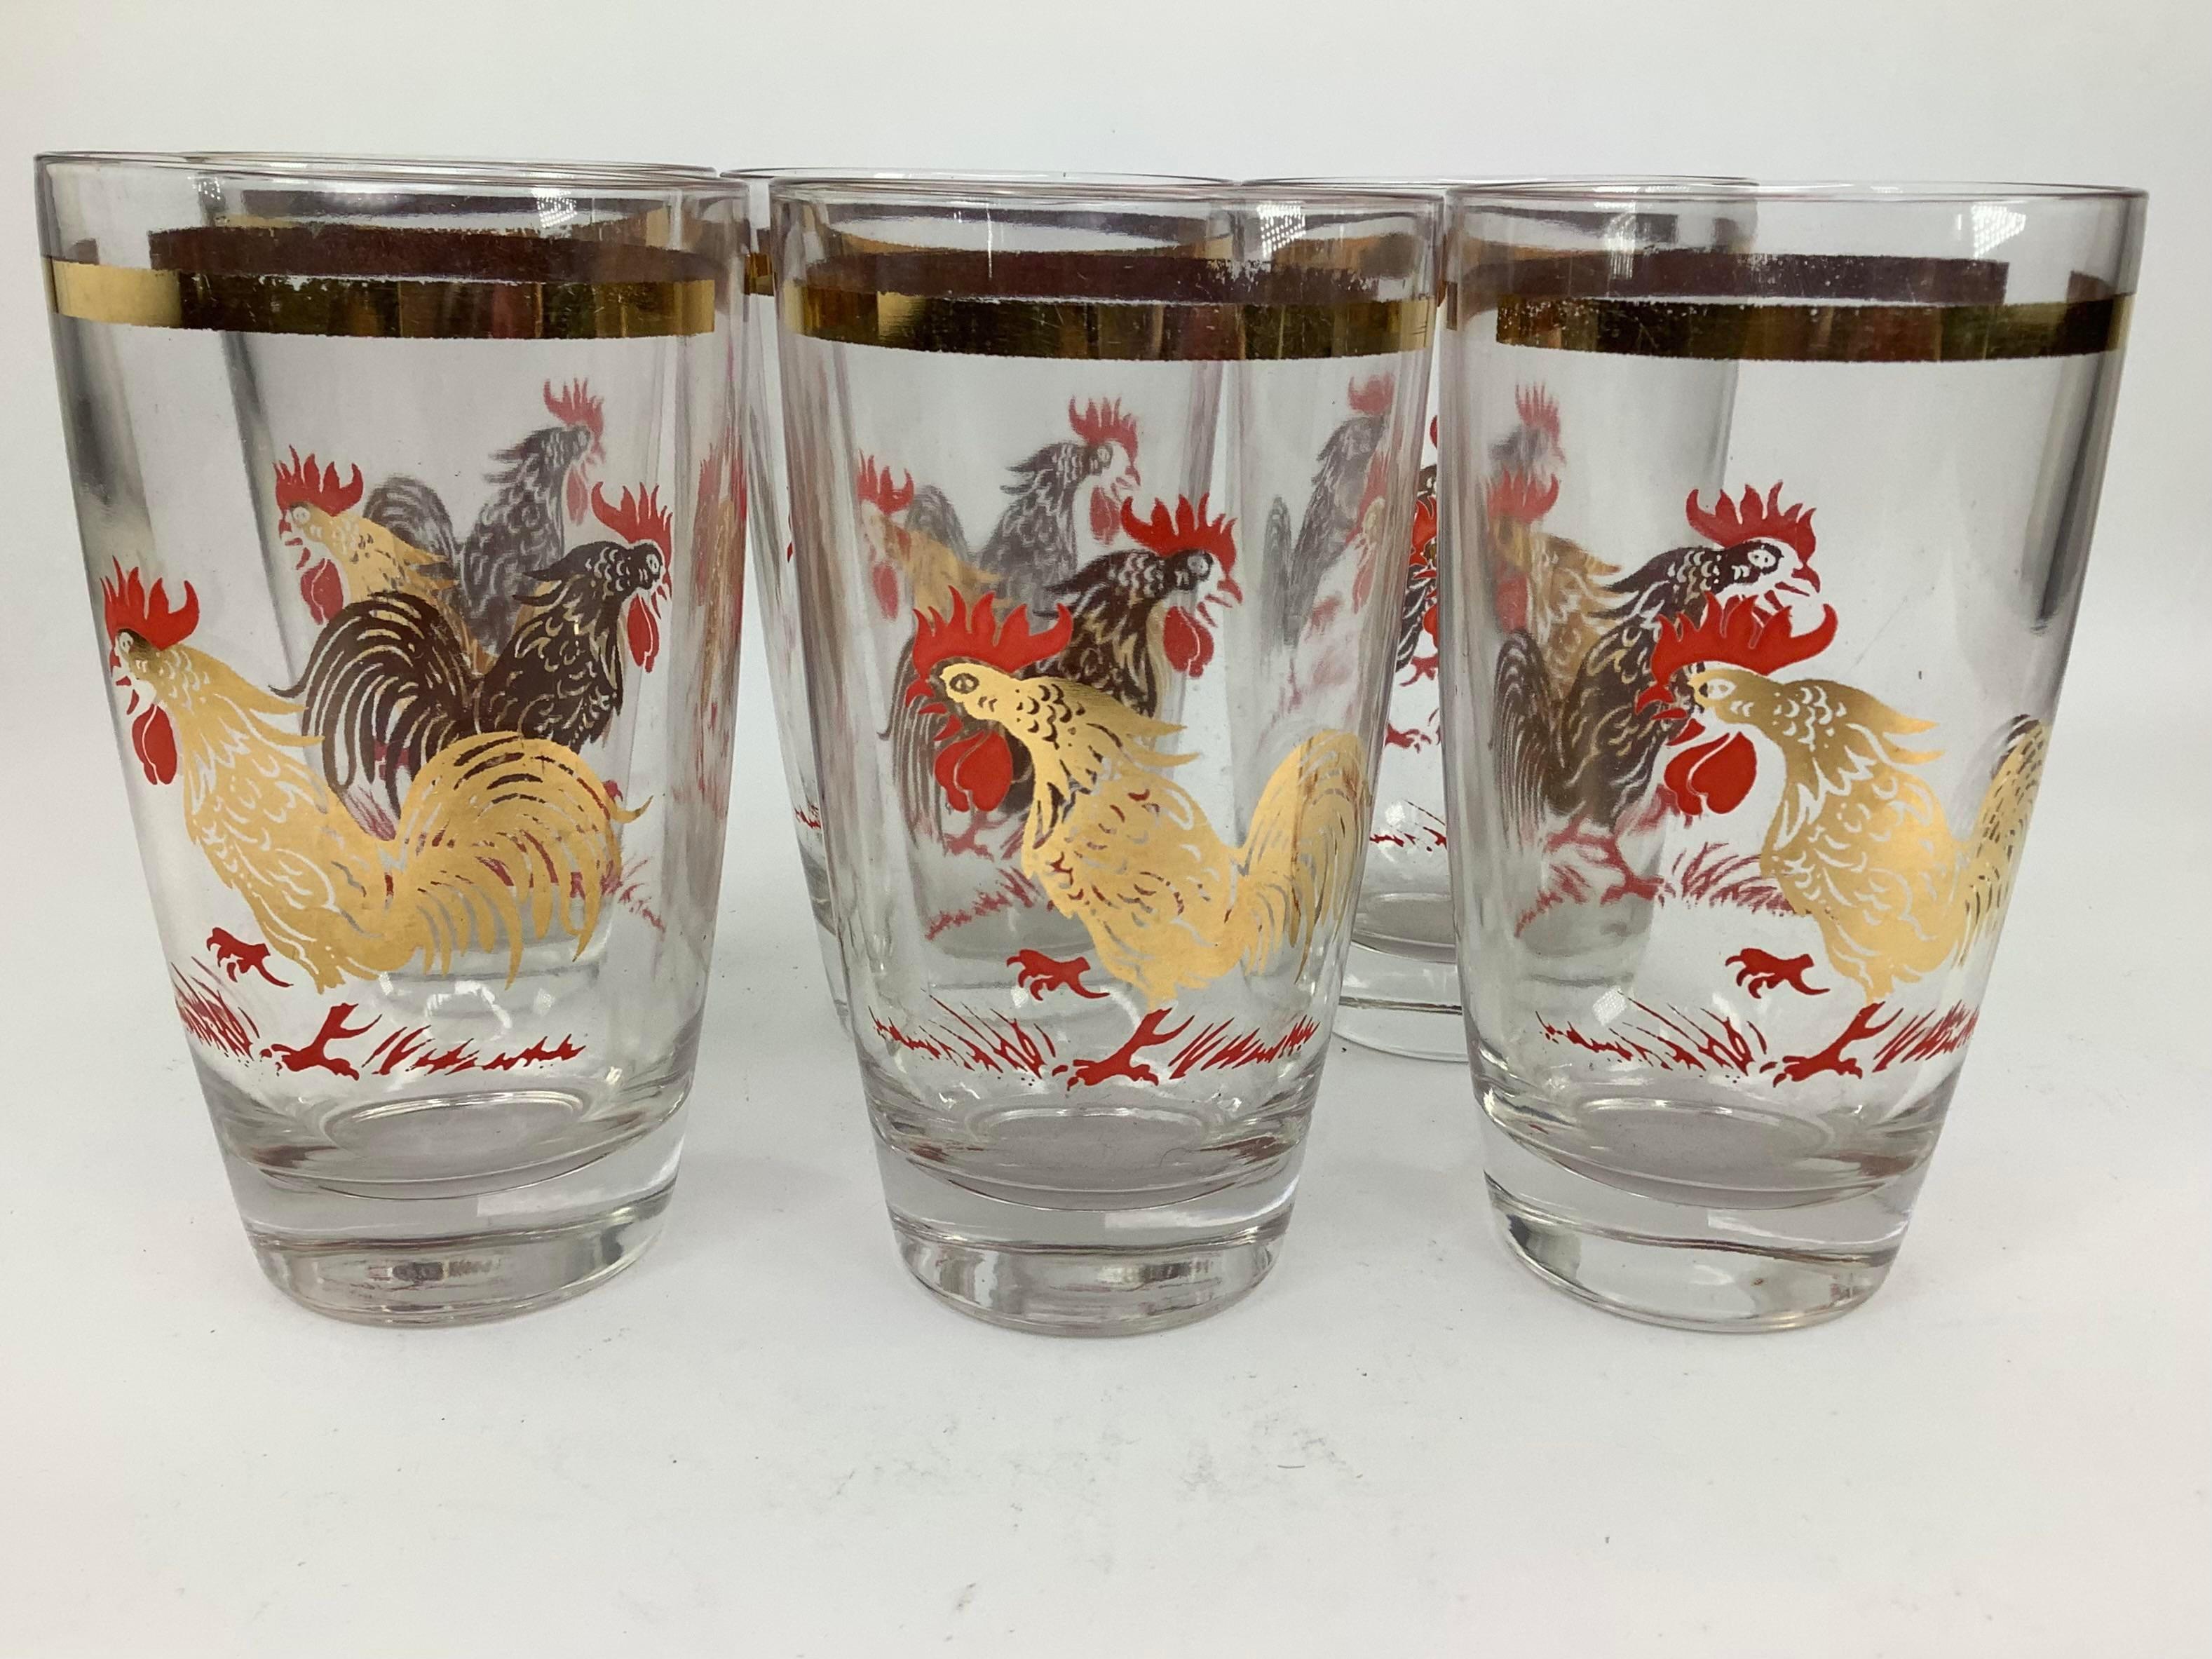 Set of 6 Vintage Vintage Highball Glasses or Tumblers Decorated with Crowing Gilt Roosters with Red Combs and Red Vegetation. Glasses have a gilt band at the top. Glasses measure 5 1/4